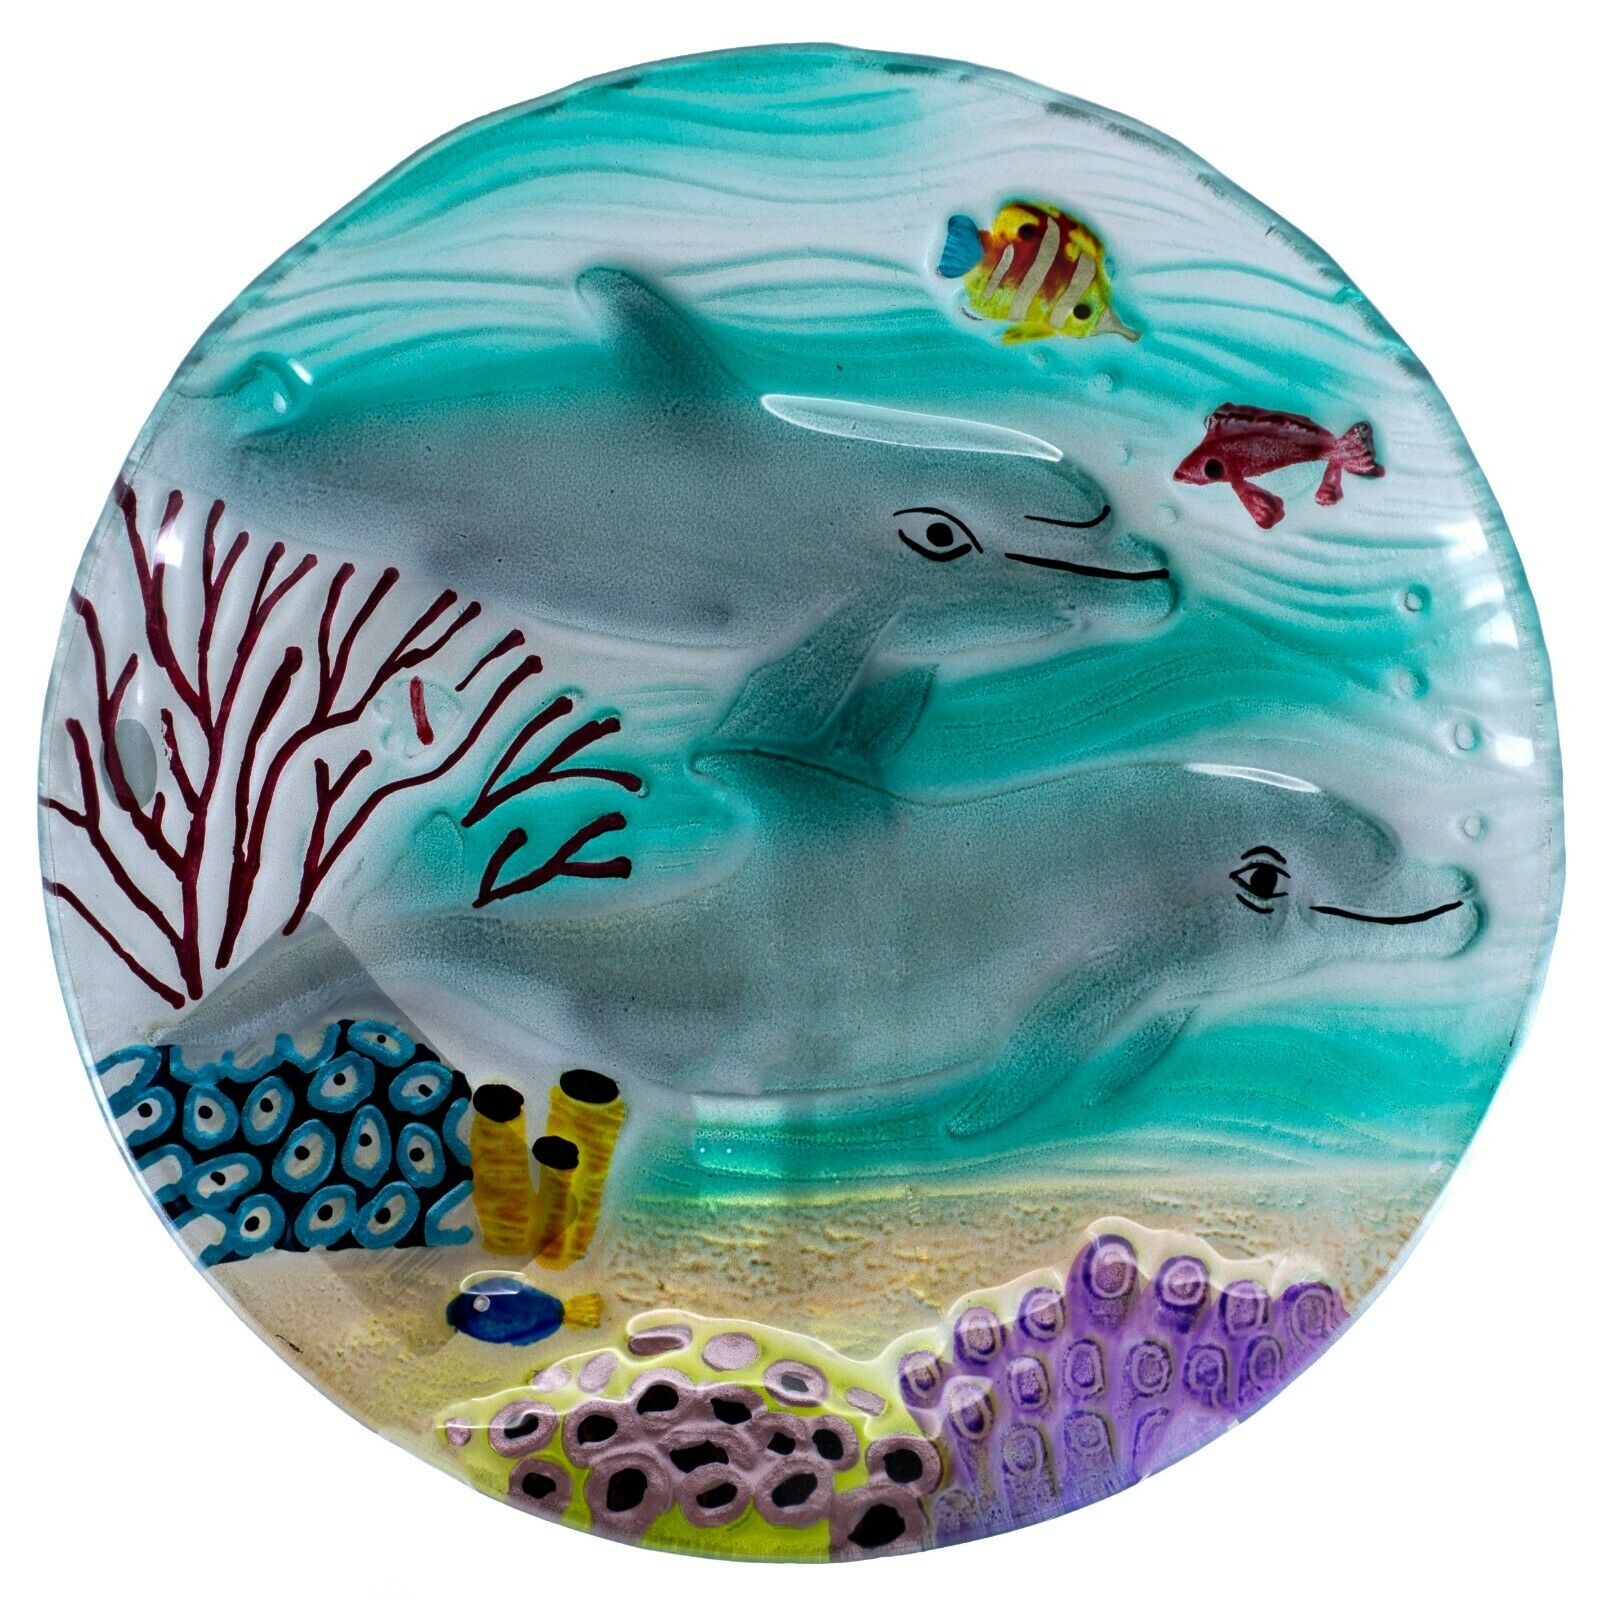 Handcrafted Fused Glass Dolphins With Fish Plate 8" New! Decorative & Food Safe